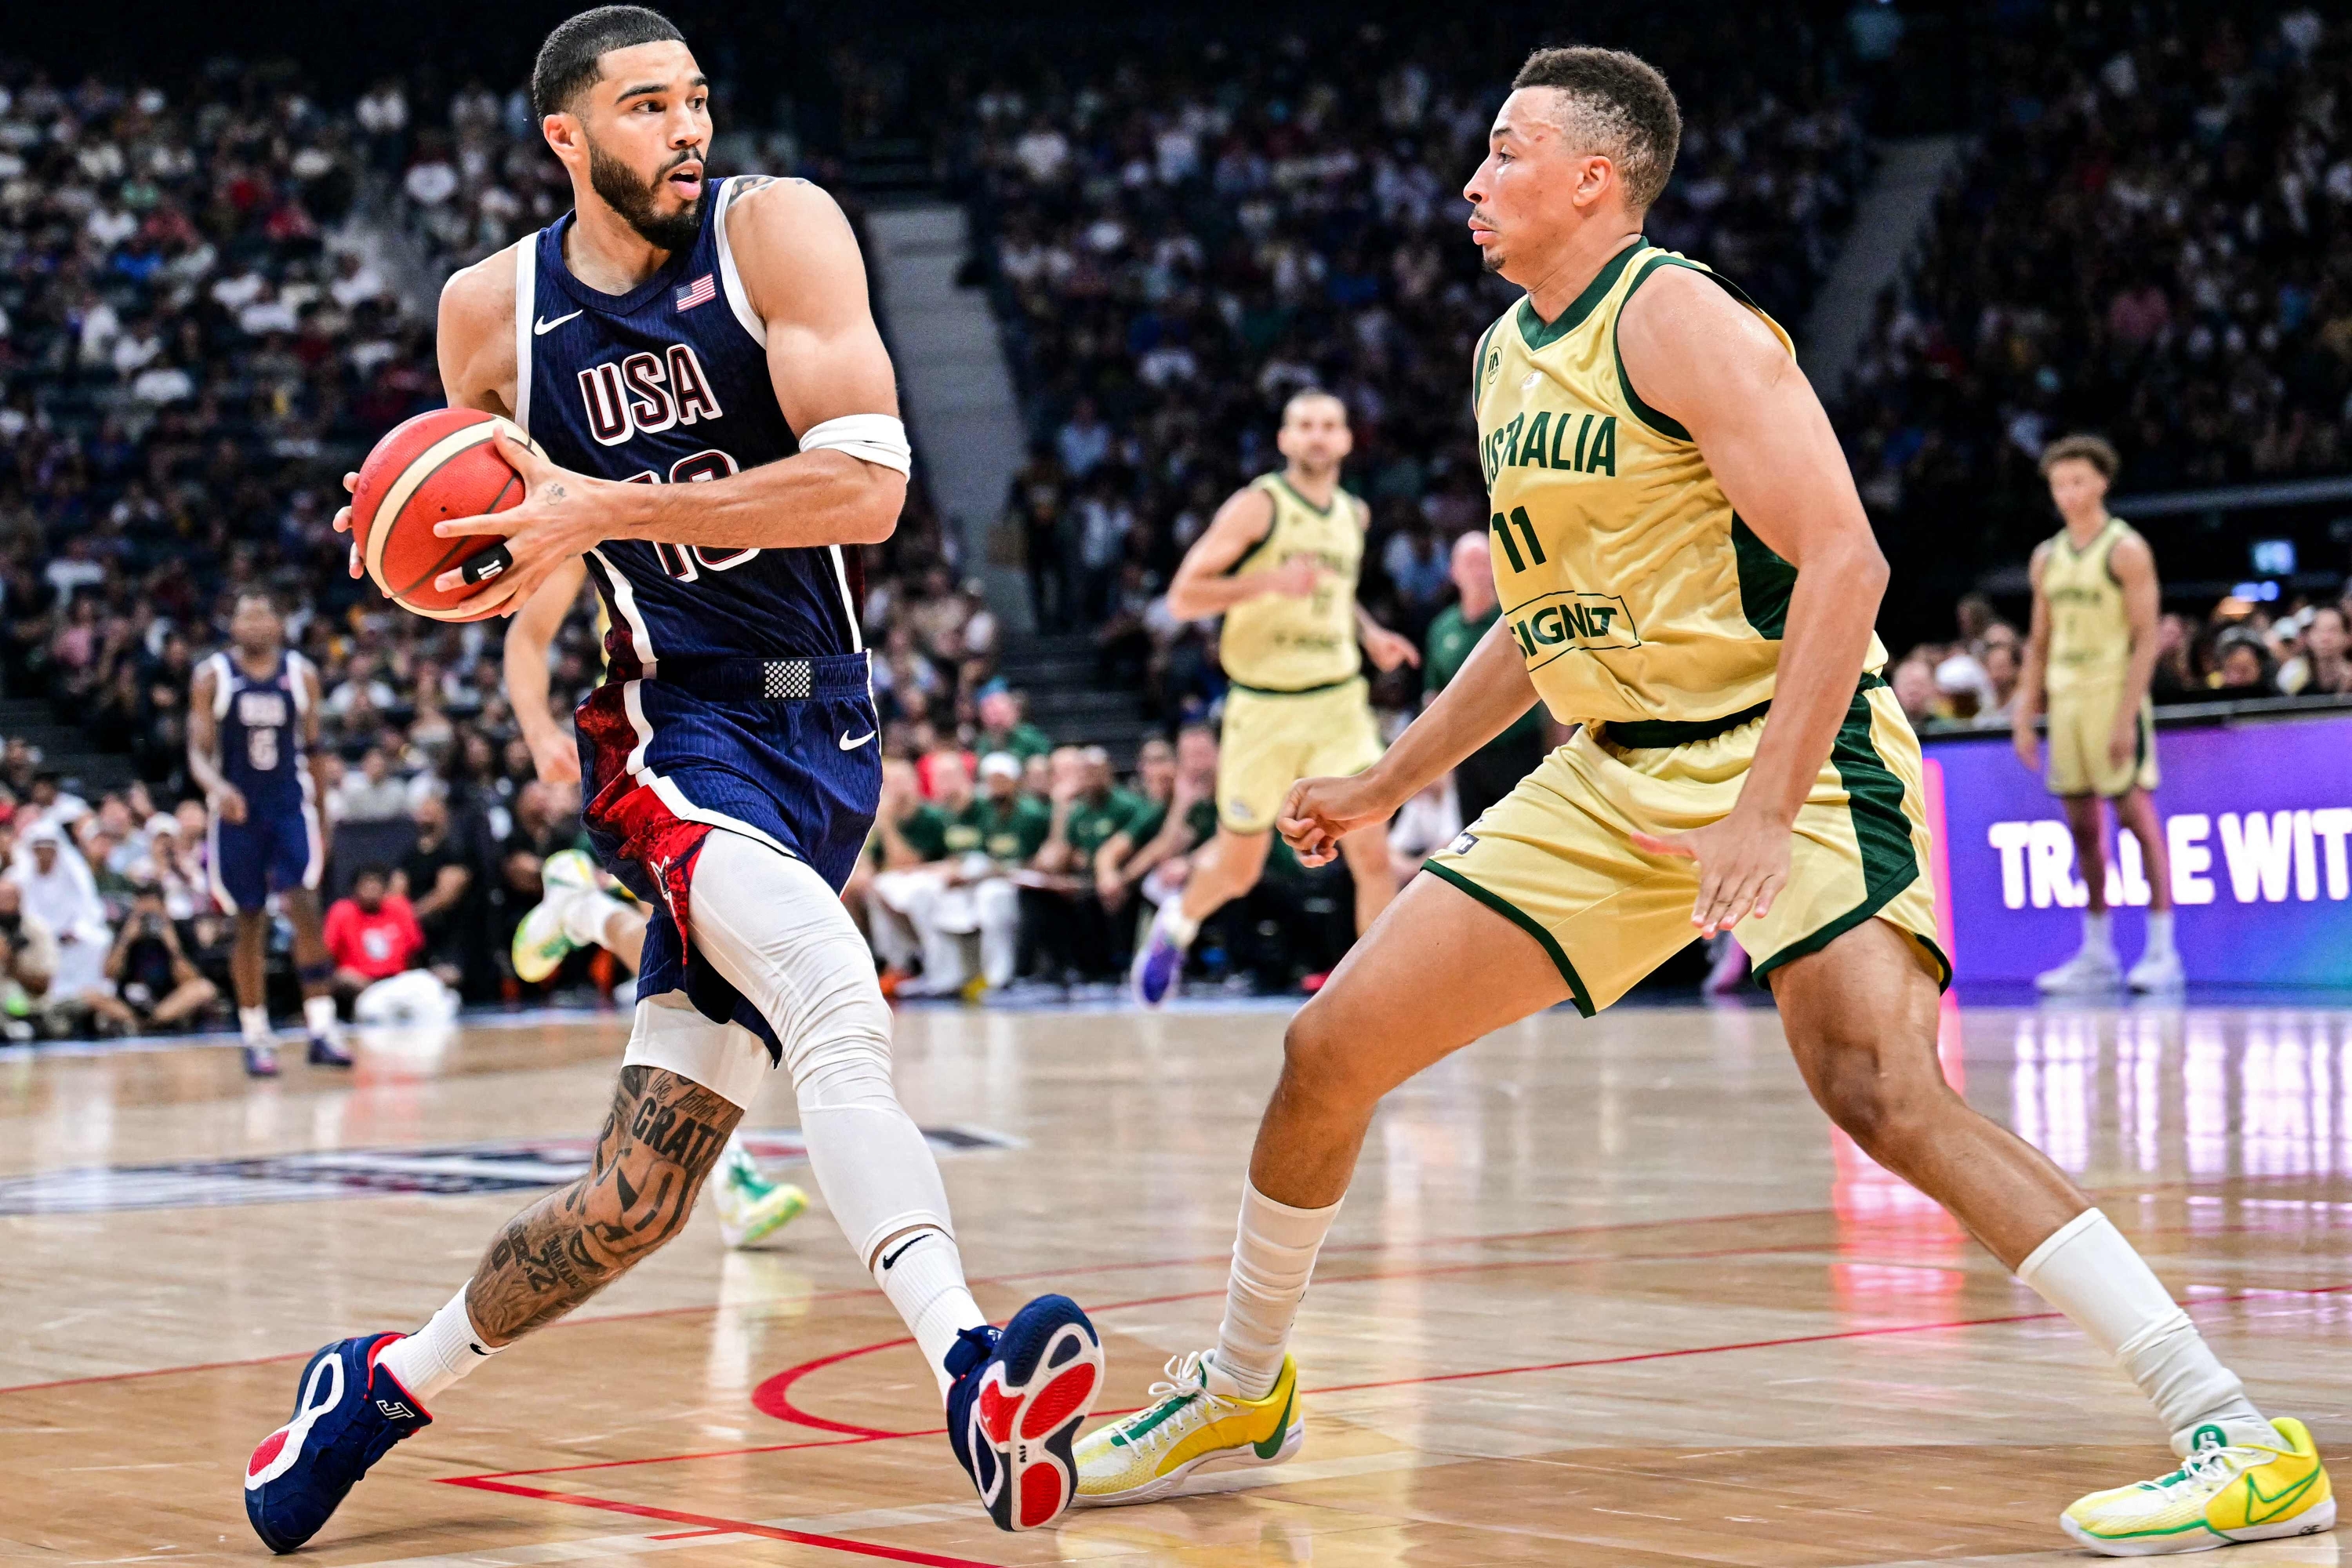 Australia's guard #11 Dante Exum marks USA's forward #10 Jayson Tatum during the Basketball Showcase friendly match between the United States and Australia at Etihad Arena in Abu Dhabi on July 15, 2024. (Photo by Giuseppe CACACE / AFP)